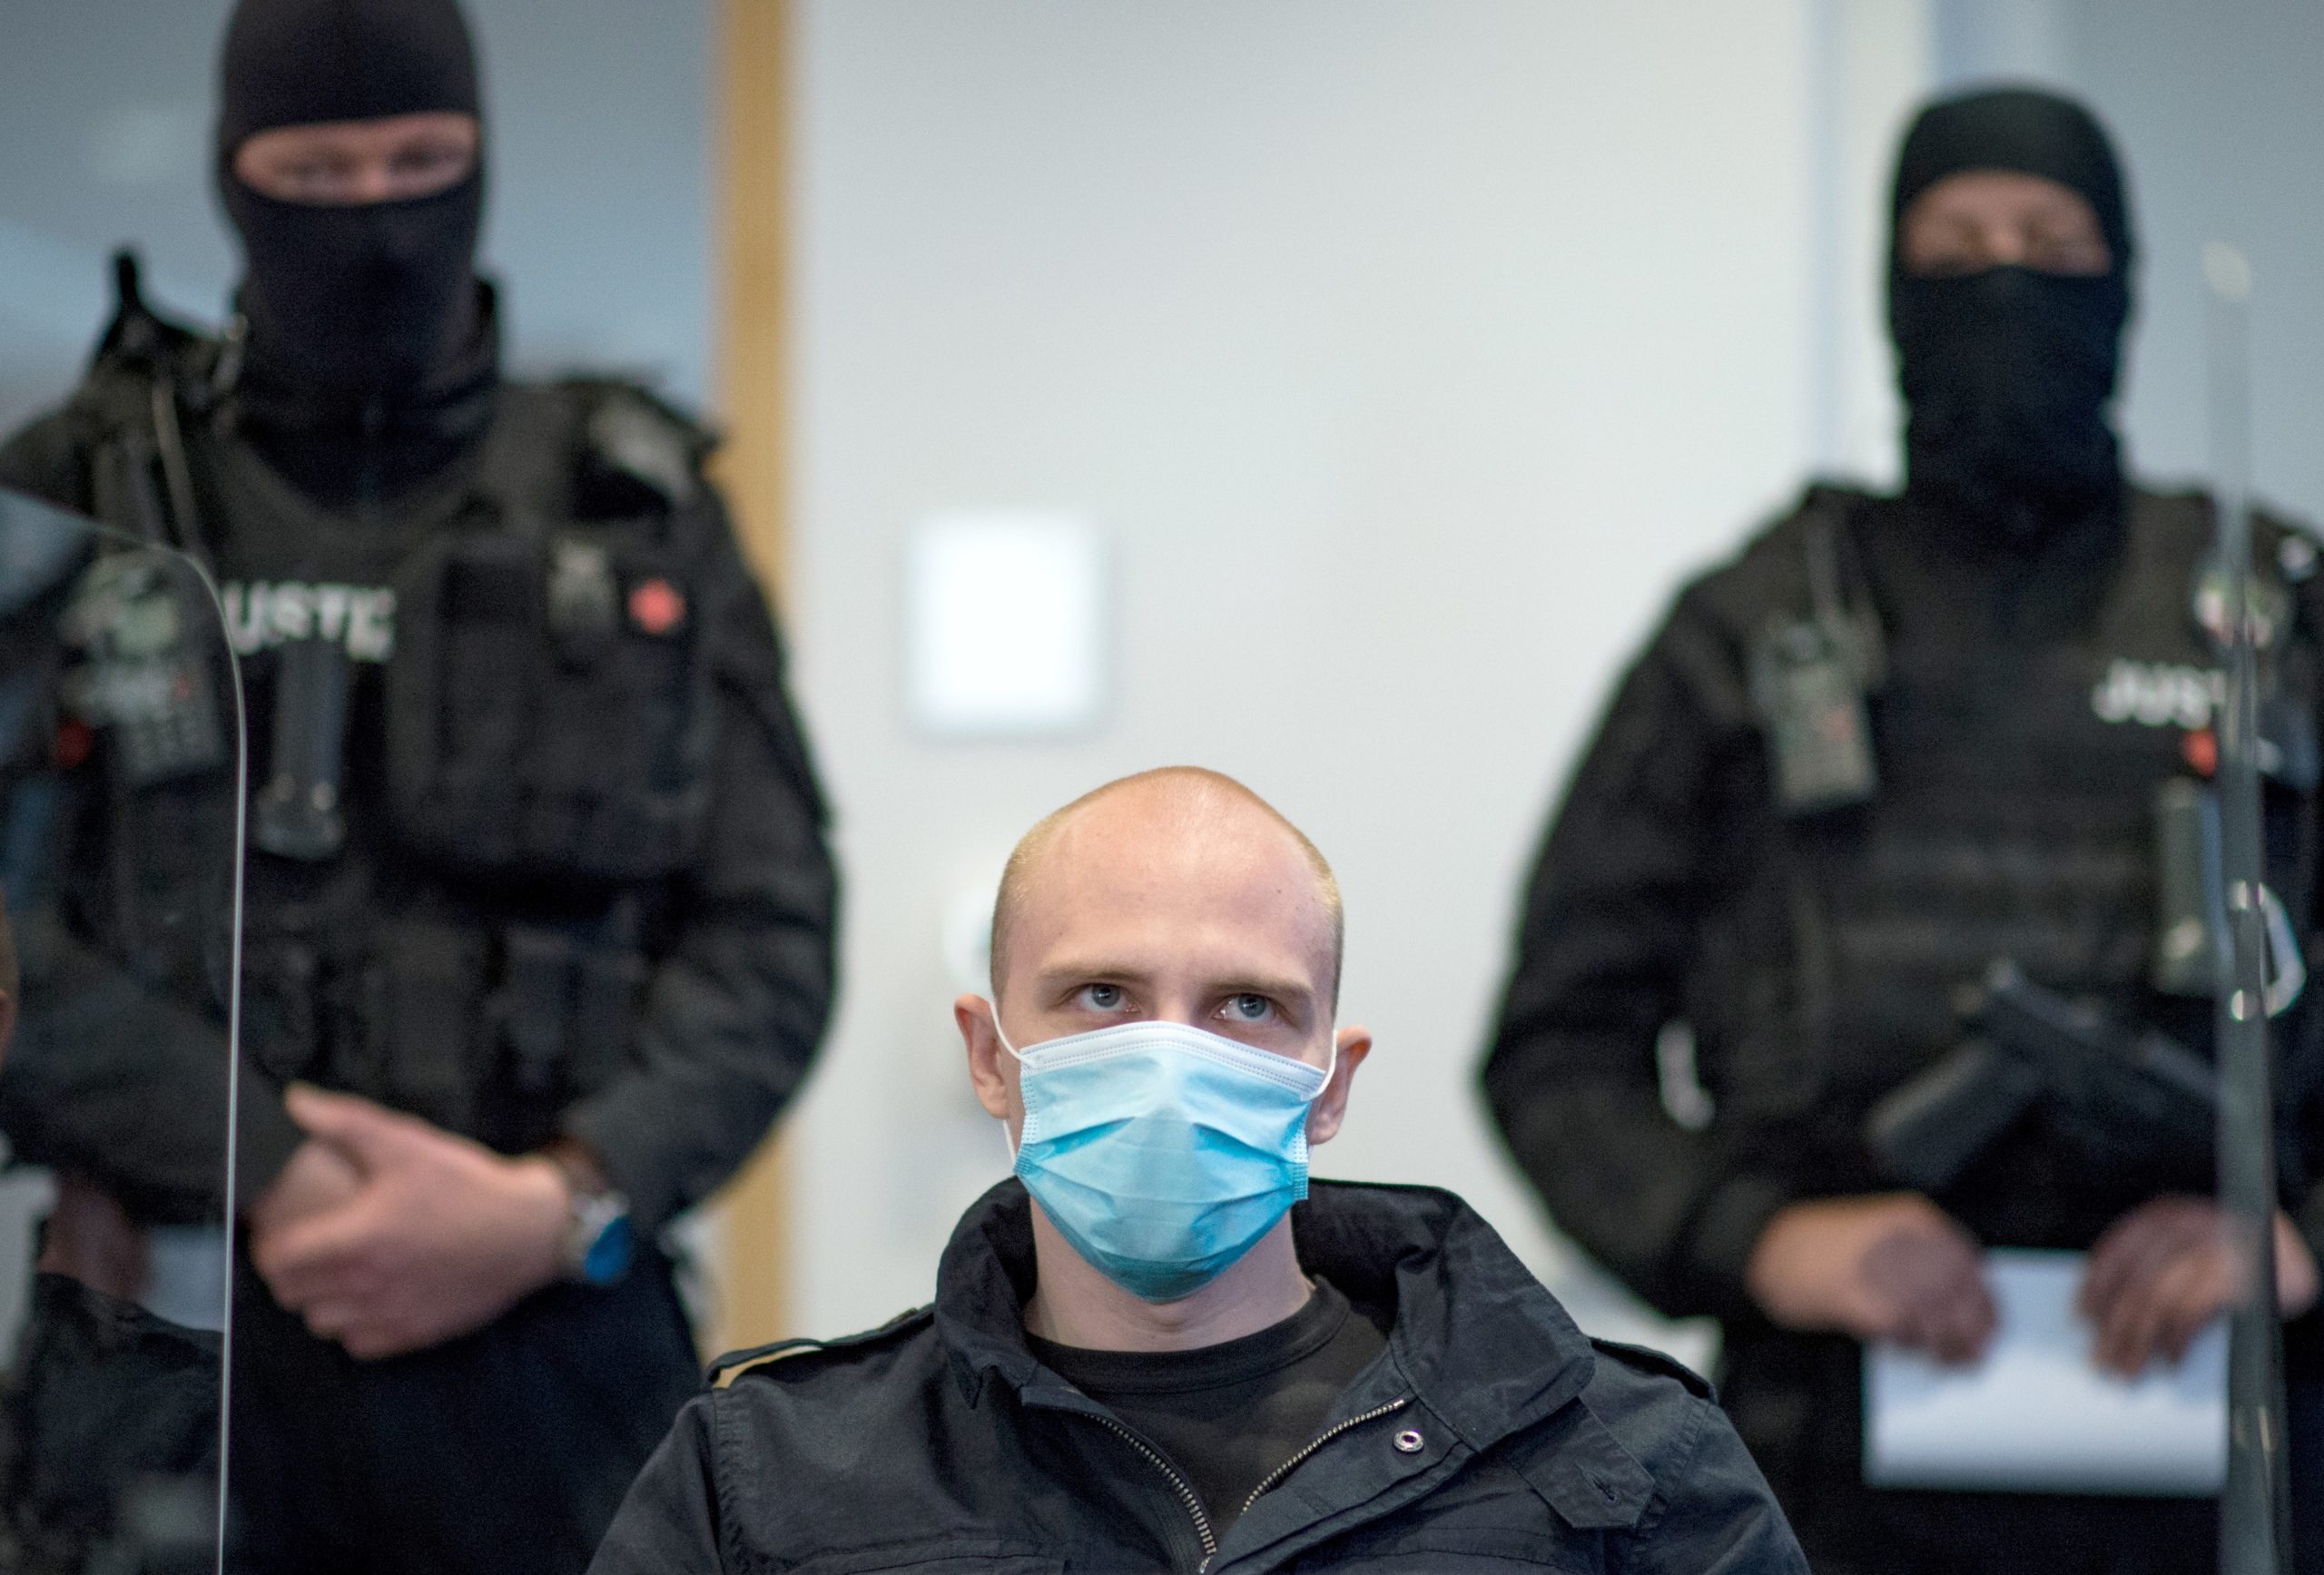 Stephan Balliet waits before his trial on July 21, 2020 at the district court in Magdeburg. (Photo by HENDRIK SCHMIDT/POOL/AFP via Getty Images)